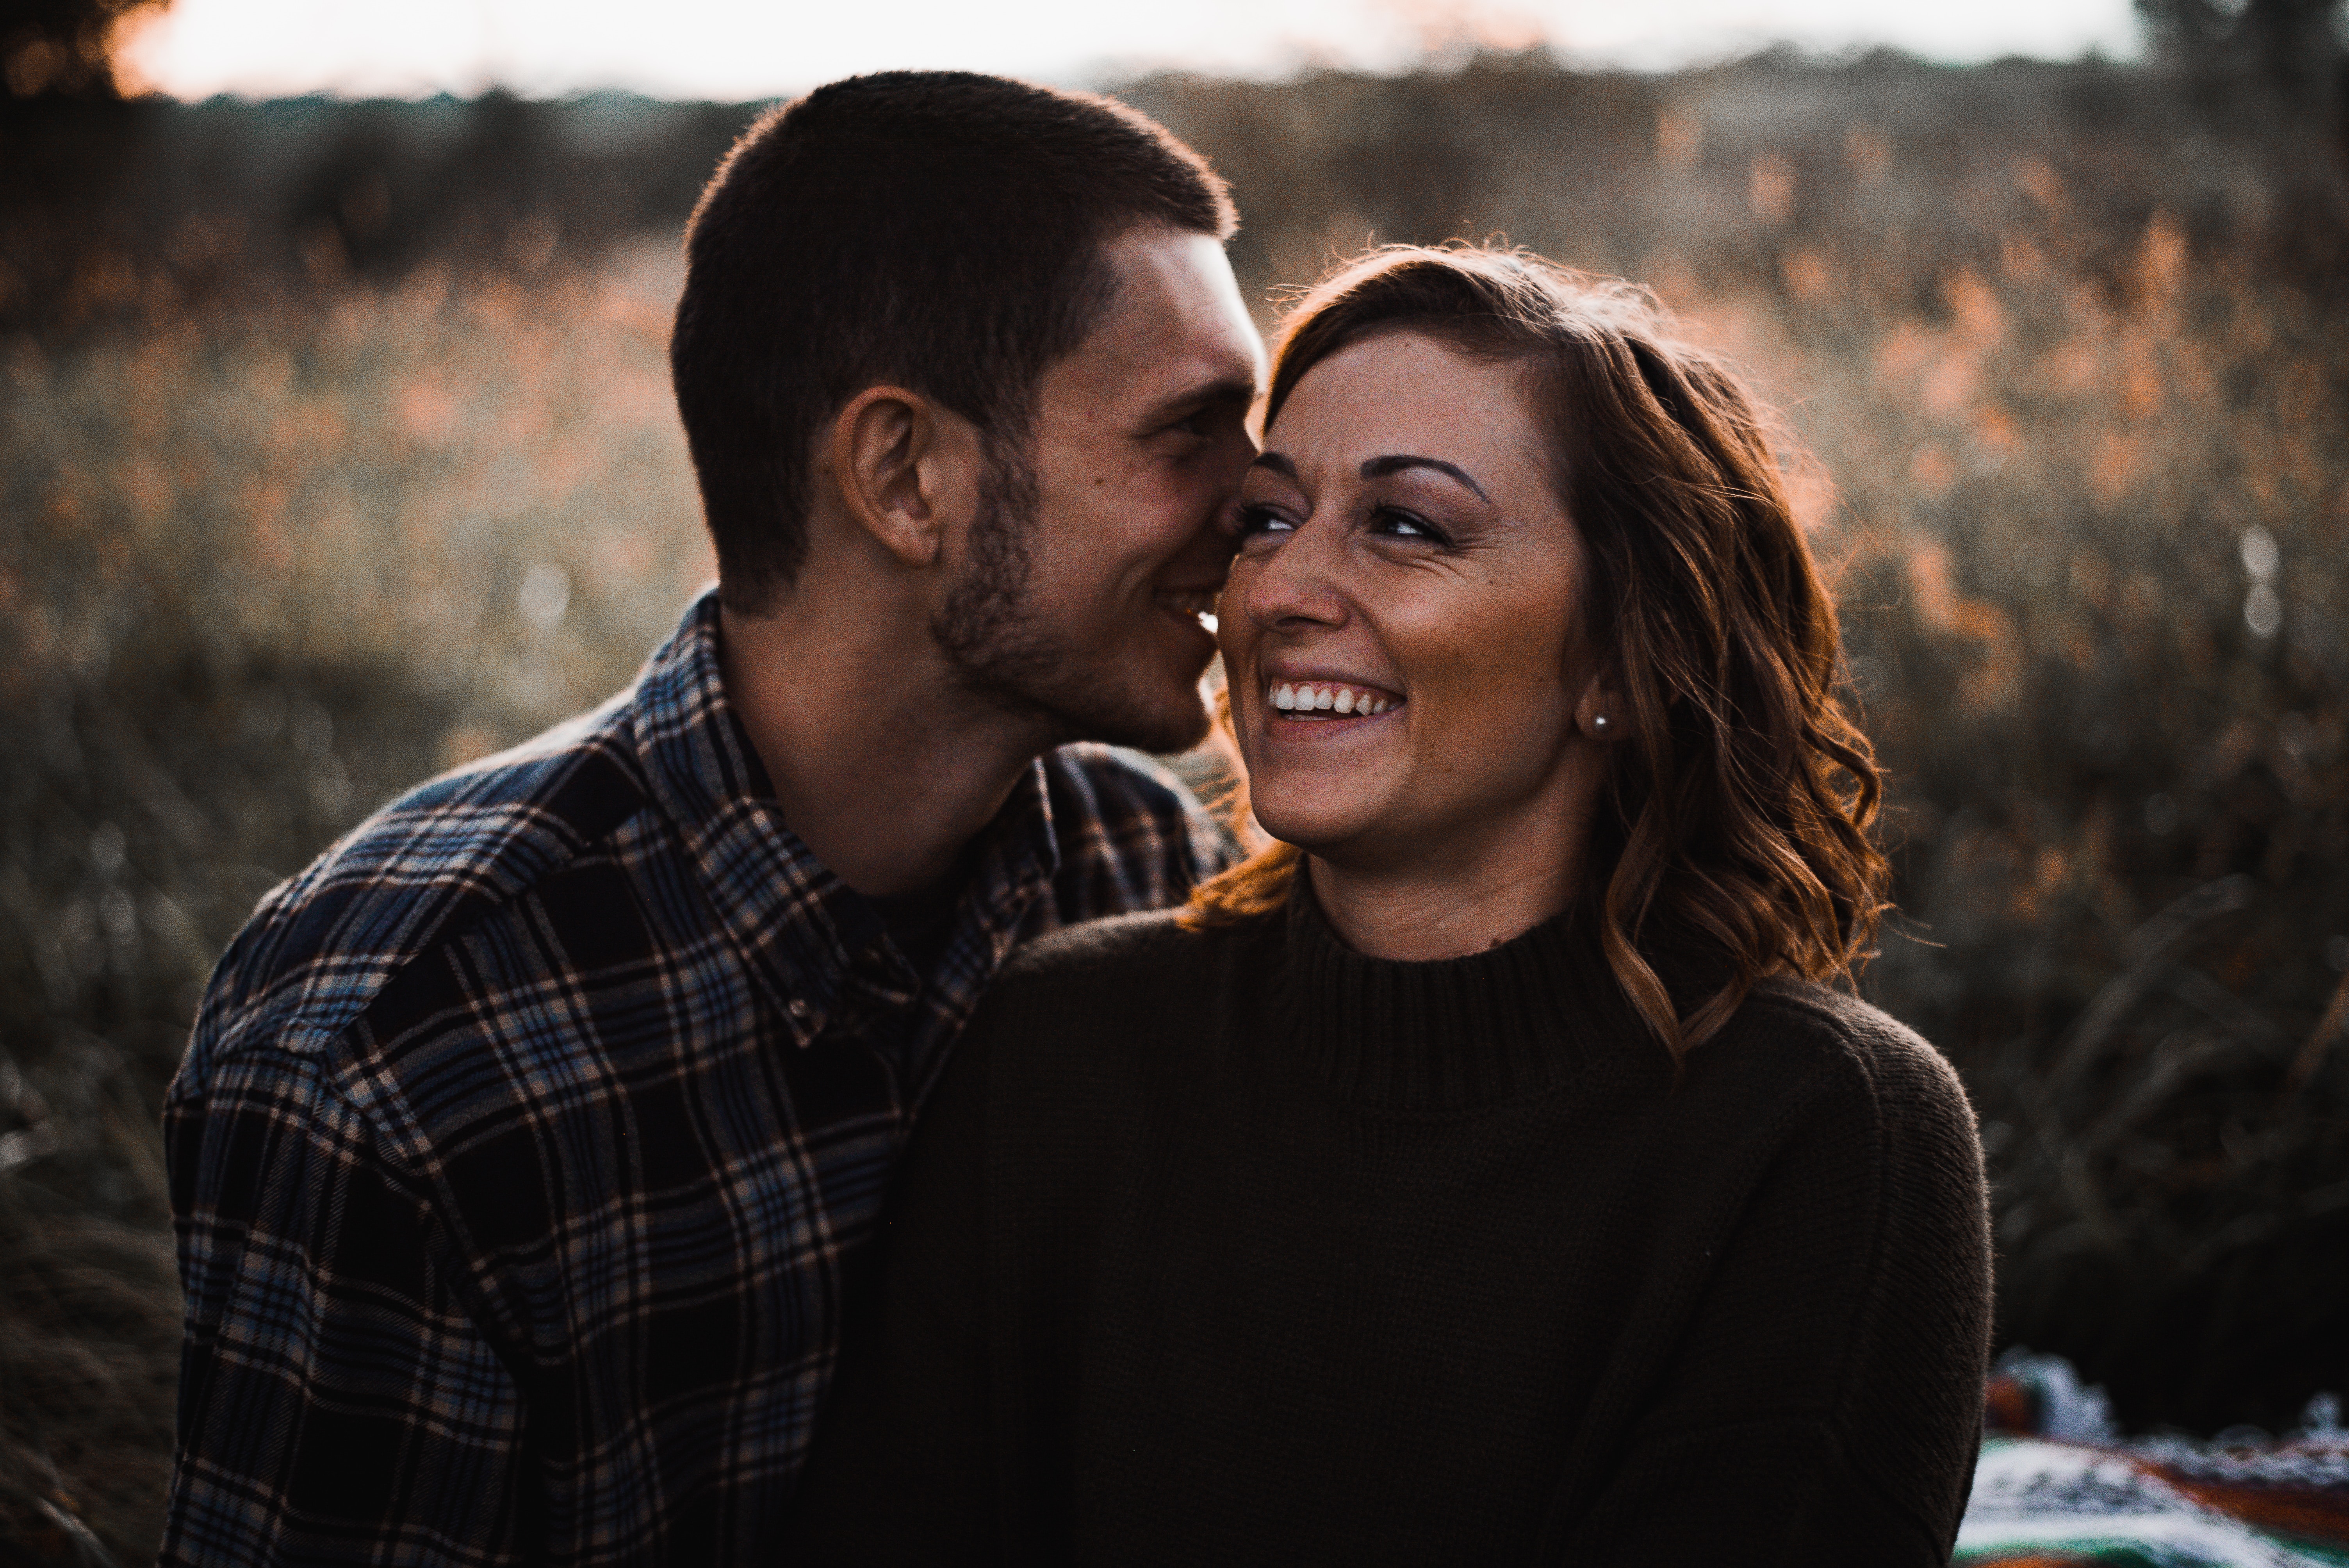 A photo of a couple laughing | Source: Unsplash